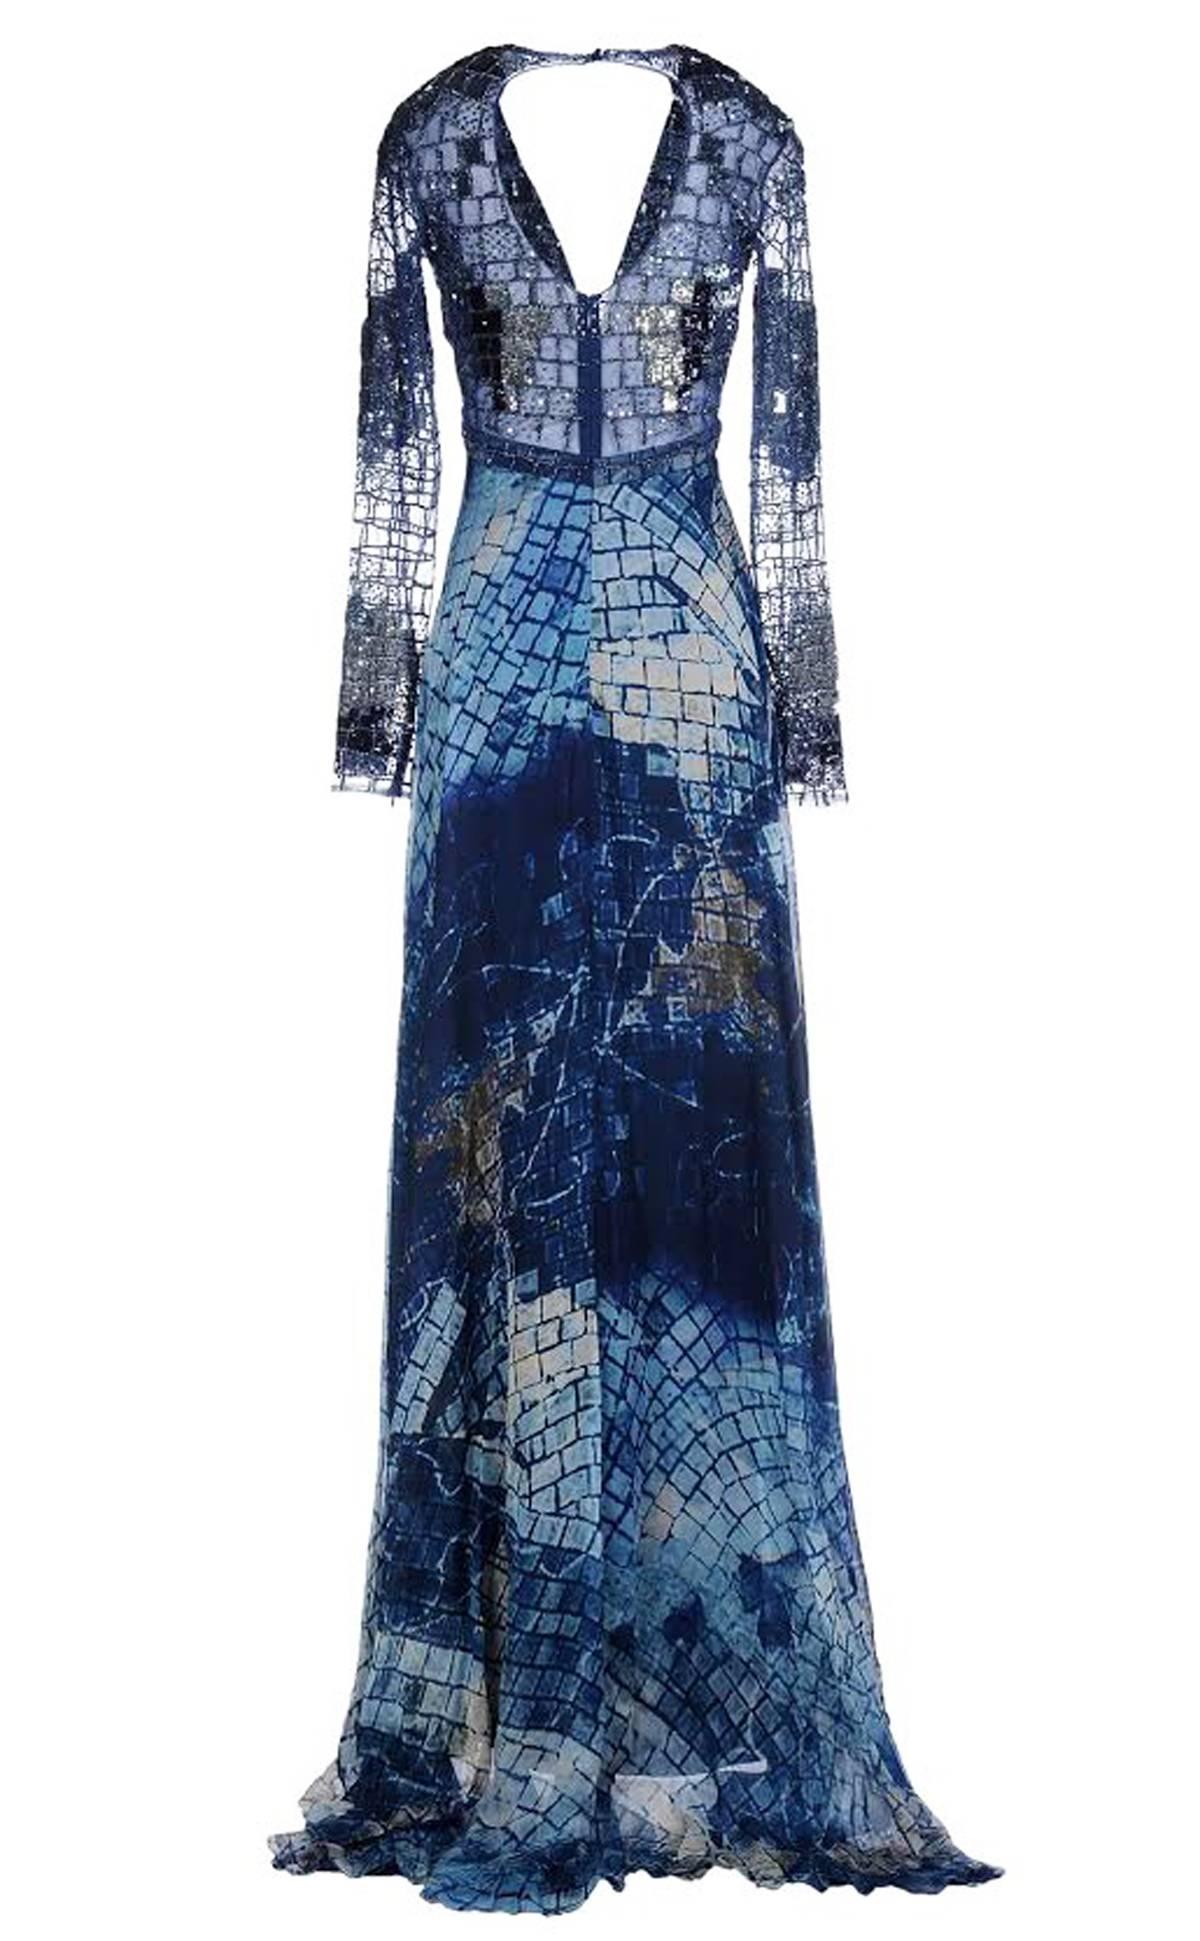 New ZUHAIR MURAD Embellished Dress Gown
Italian Size 38 -  US 2
Designer Color - Ocean
Bead and Sequin Embellished Over the Tulle.
Zip Cuff Closure, Zip at Back, Fully lined.
Measurements Flat: Waist - 12.5/13 inches, Bust - 16/17